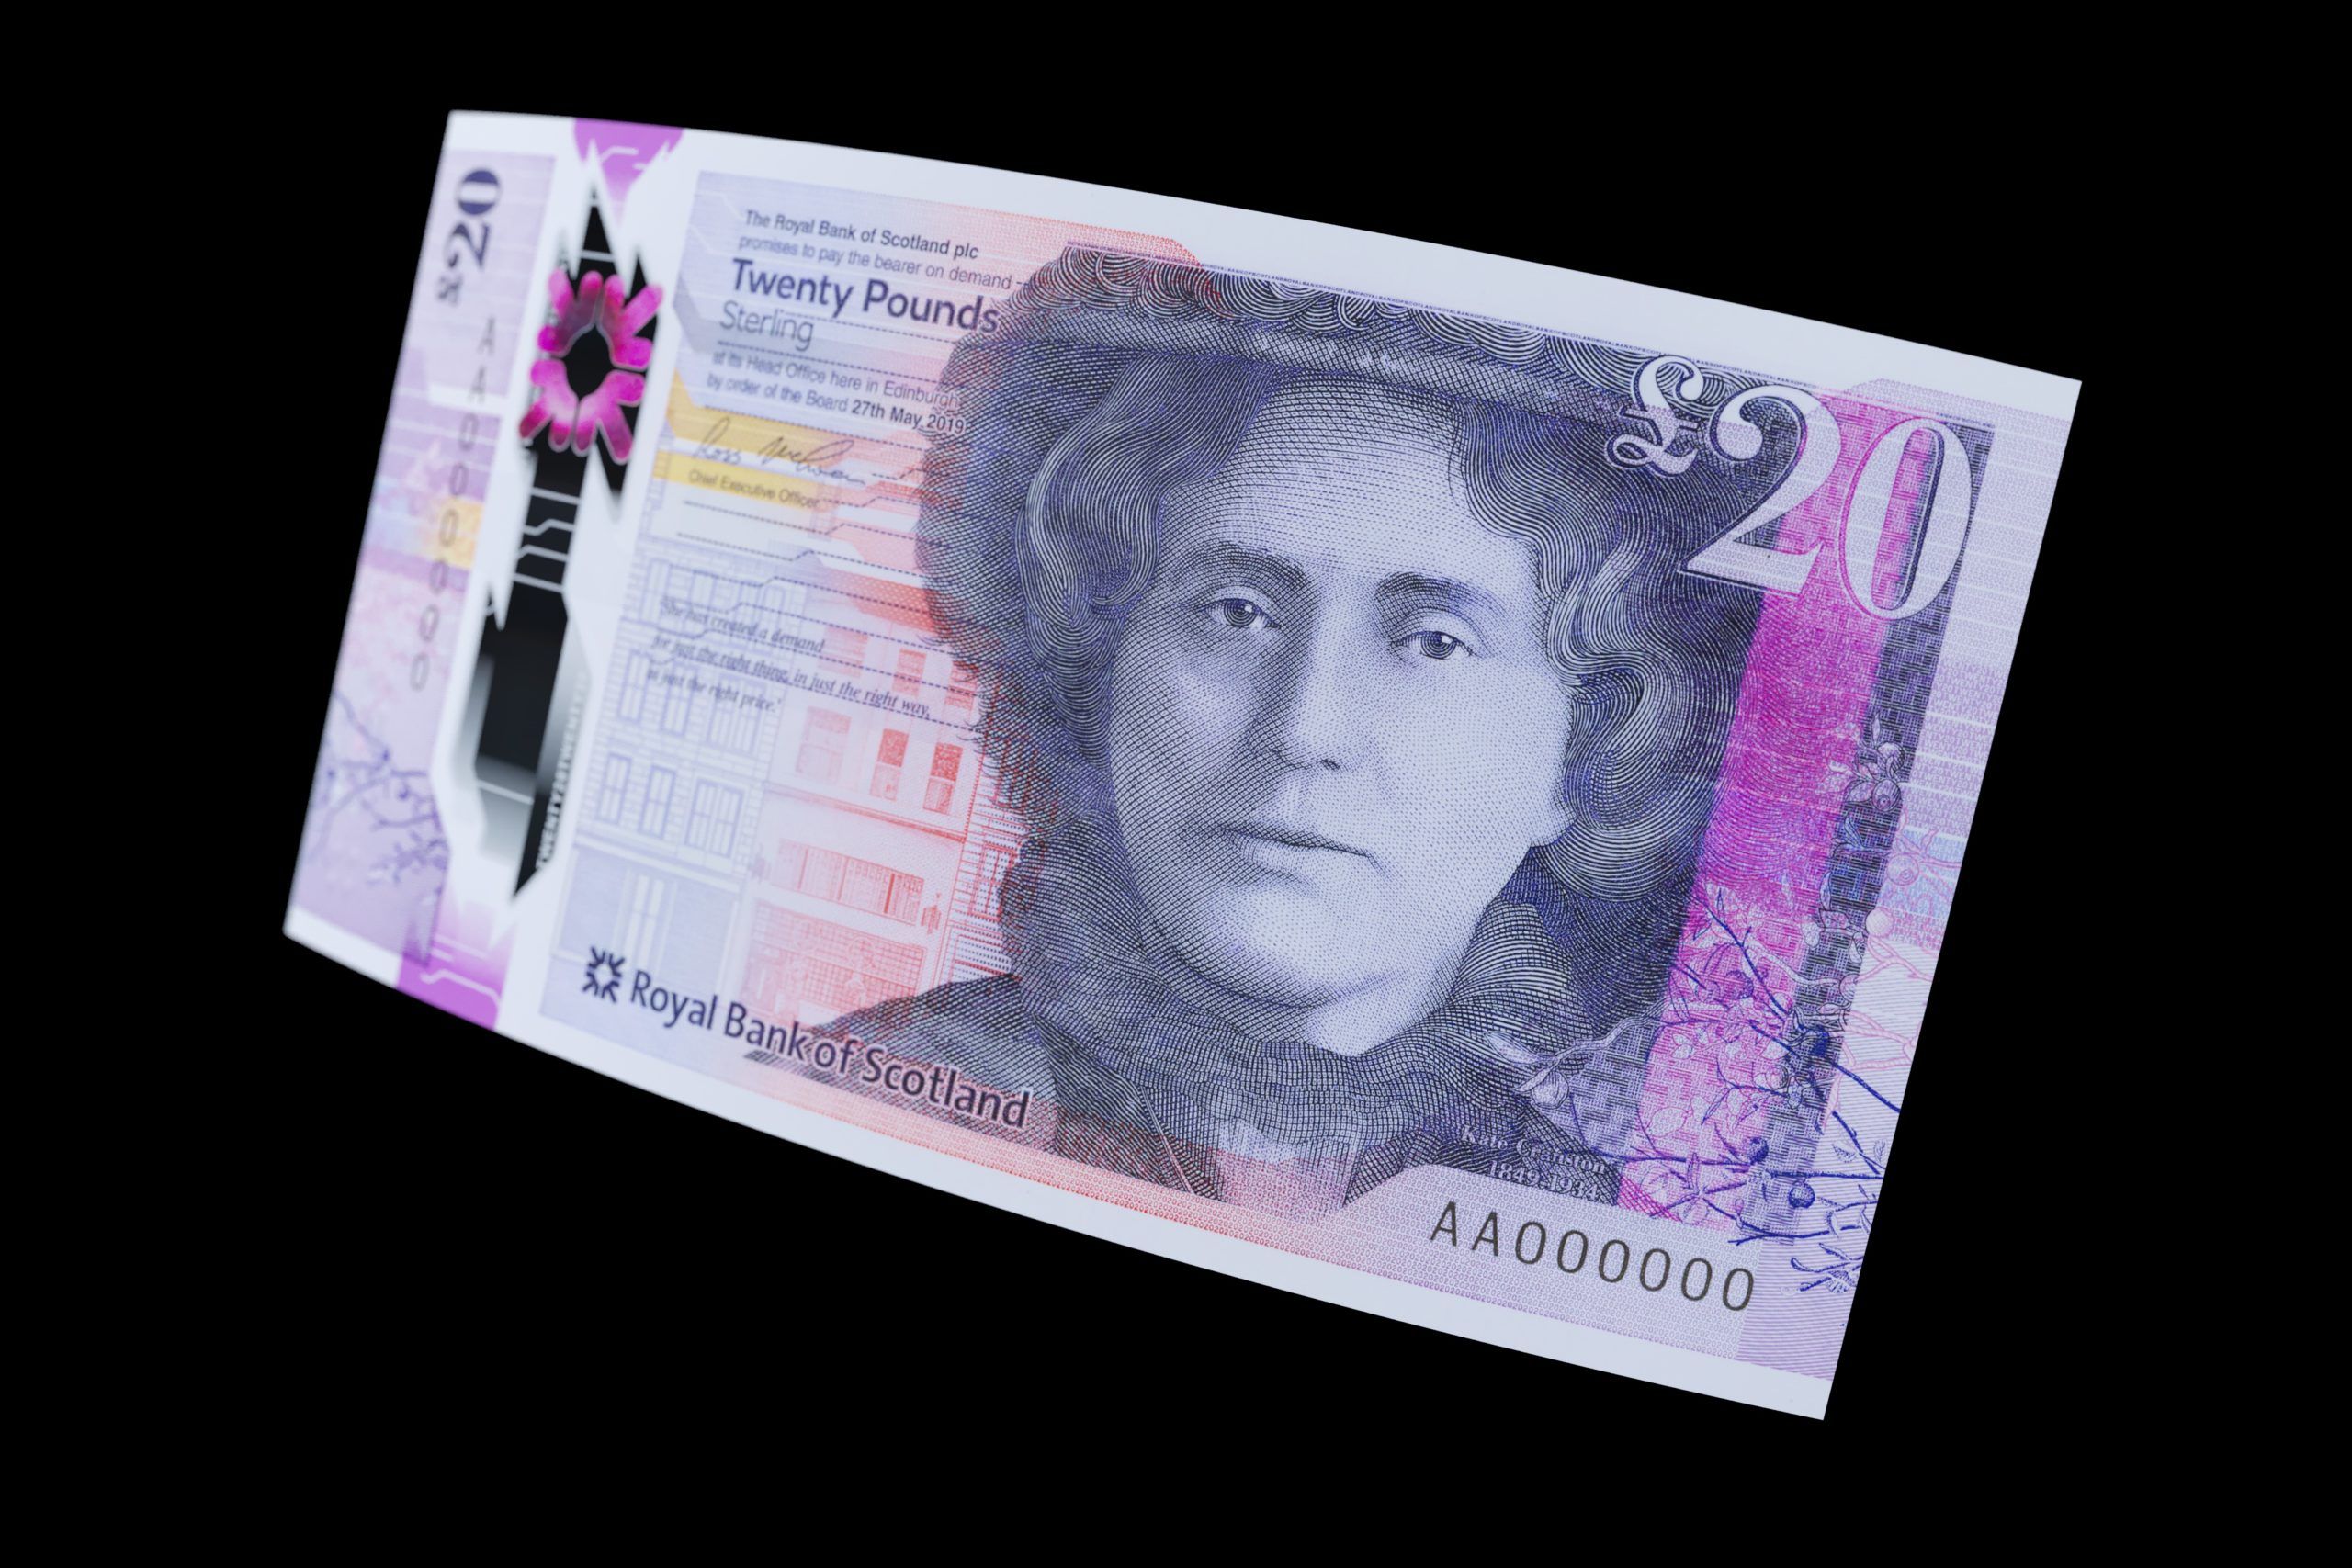 Royal Bank of Scotland Currency Design £20 polymer banknote featuring Kate Cranston. Creative by O Street Glasgow.